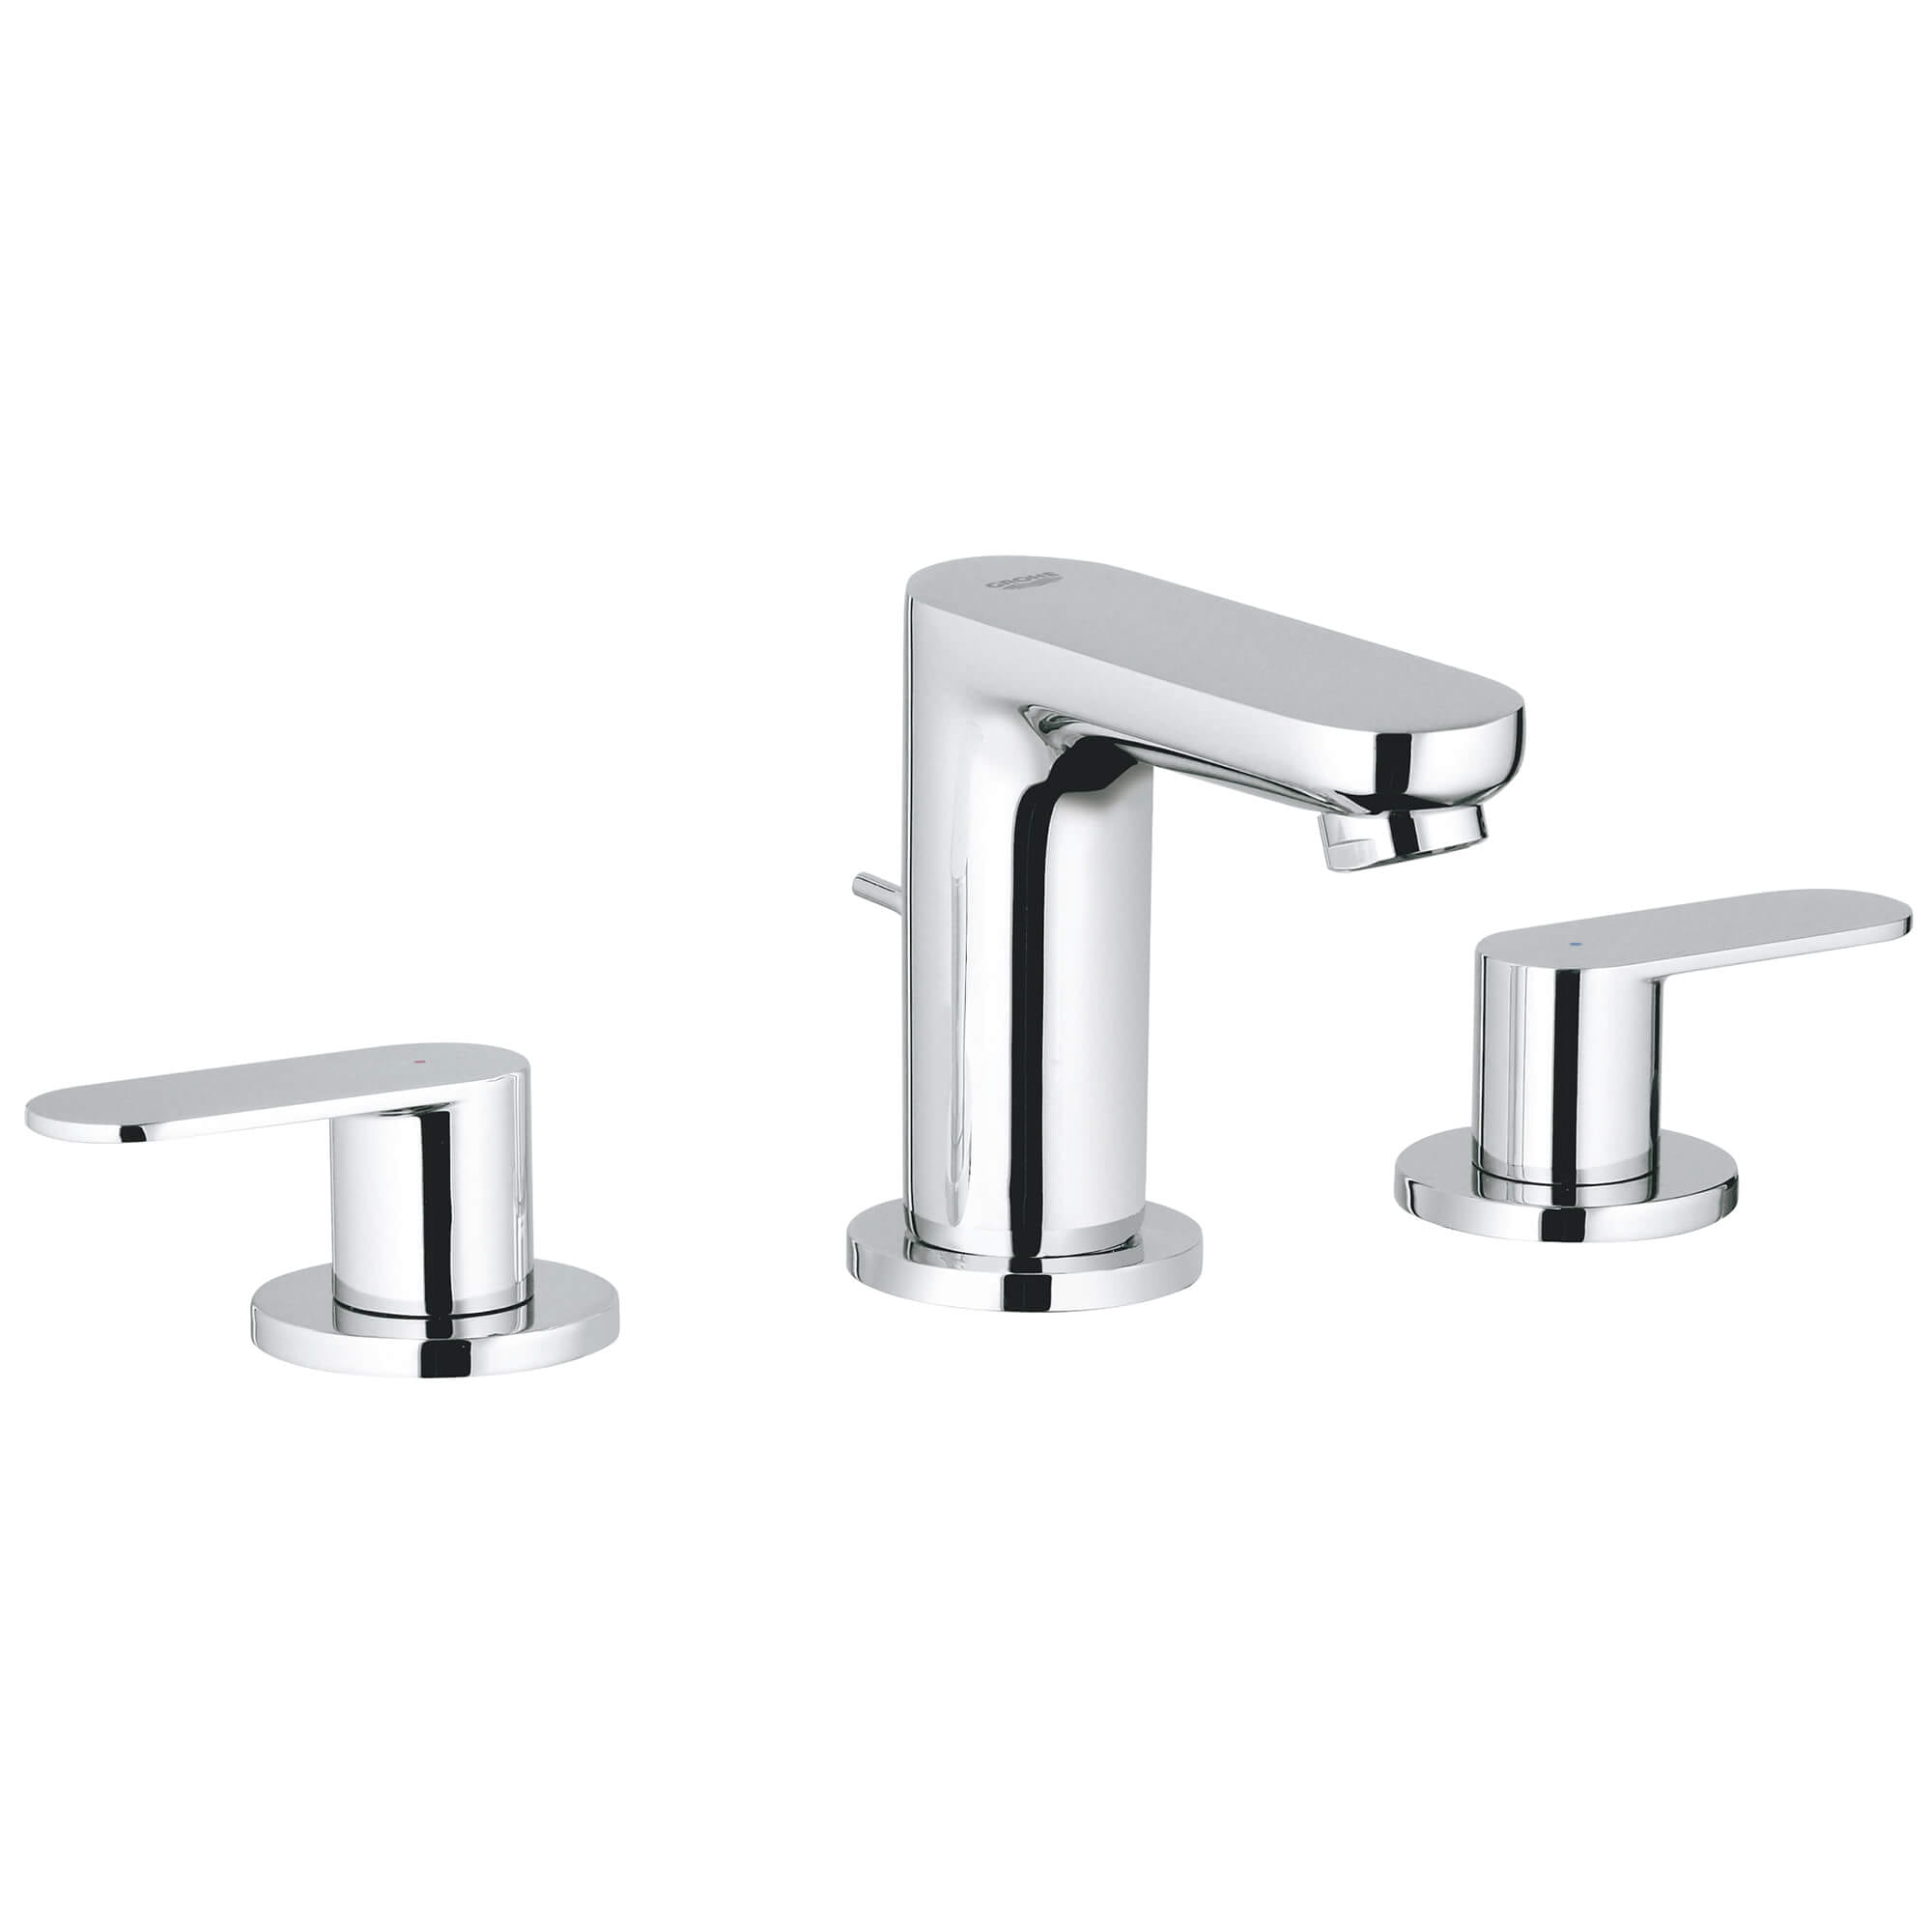 Cosmopolitan 8 in Widespread 2 Handle Bathroom Faucet   15 GPM GROHE CHROME